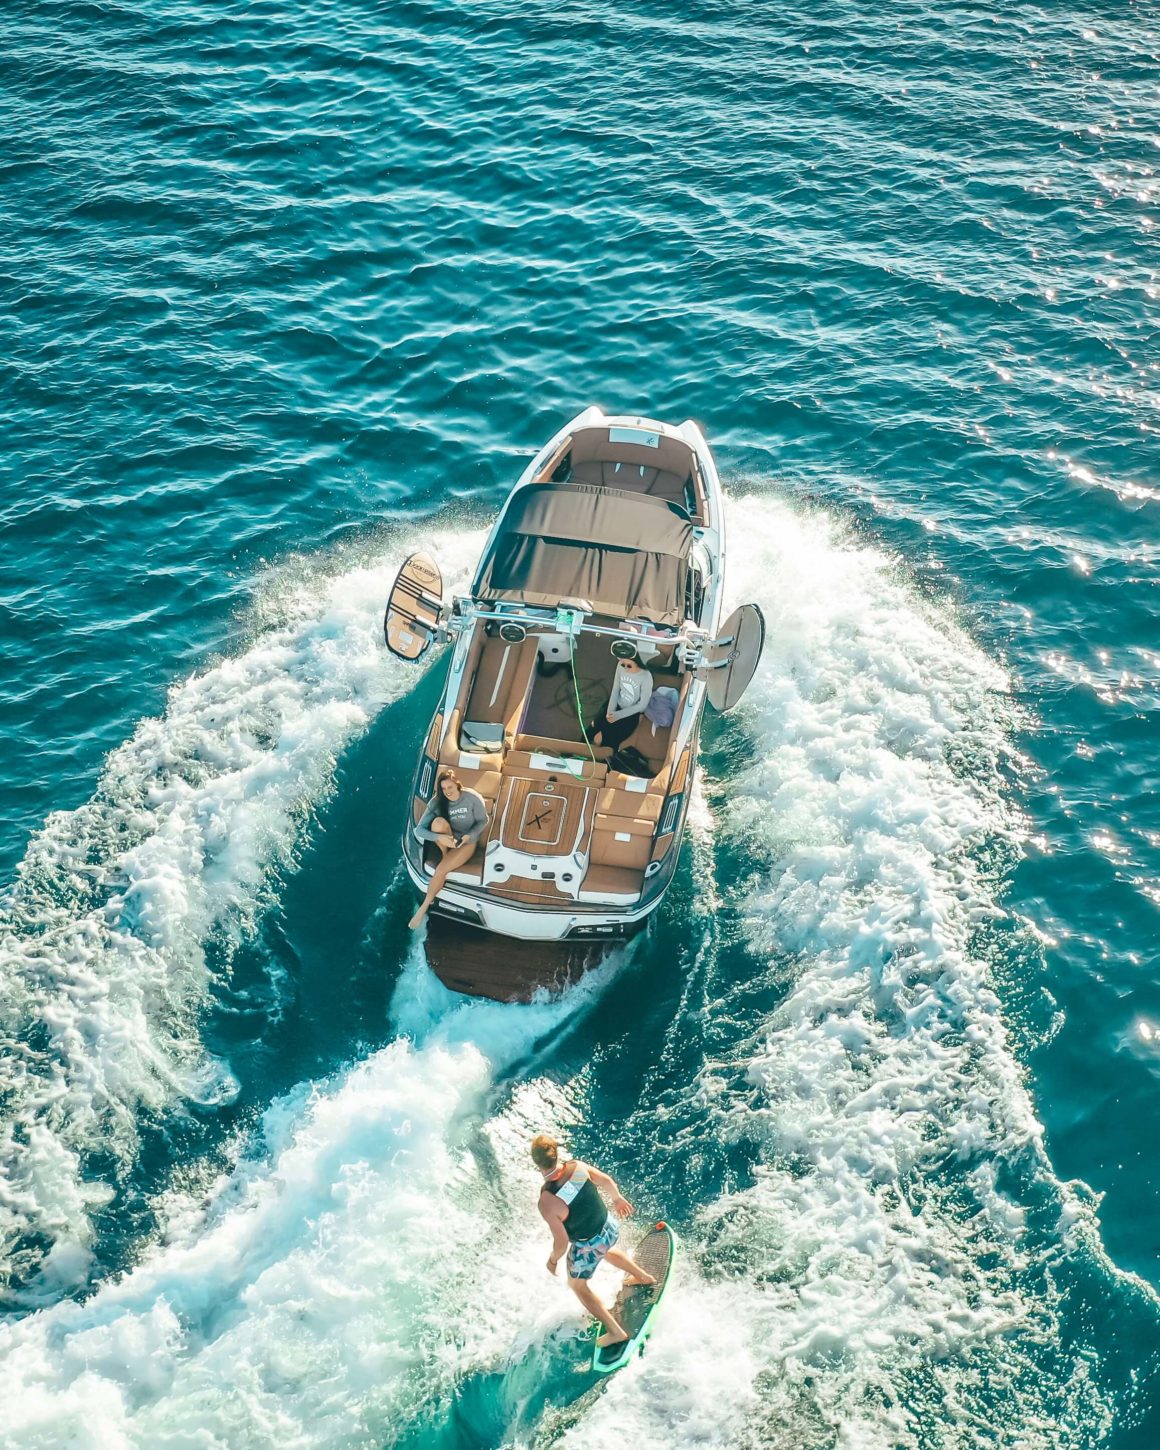 Aerial view of a wakeboard boat and a wakeboarder